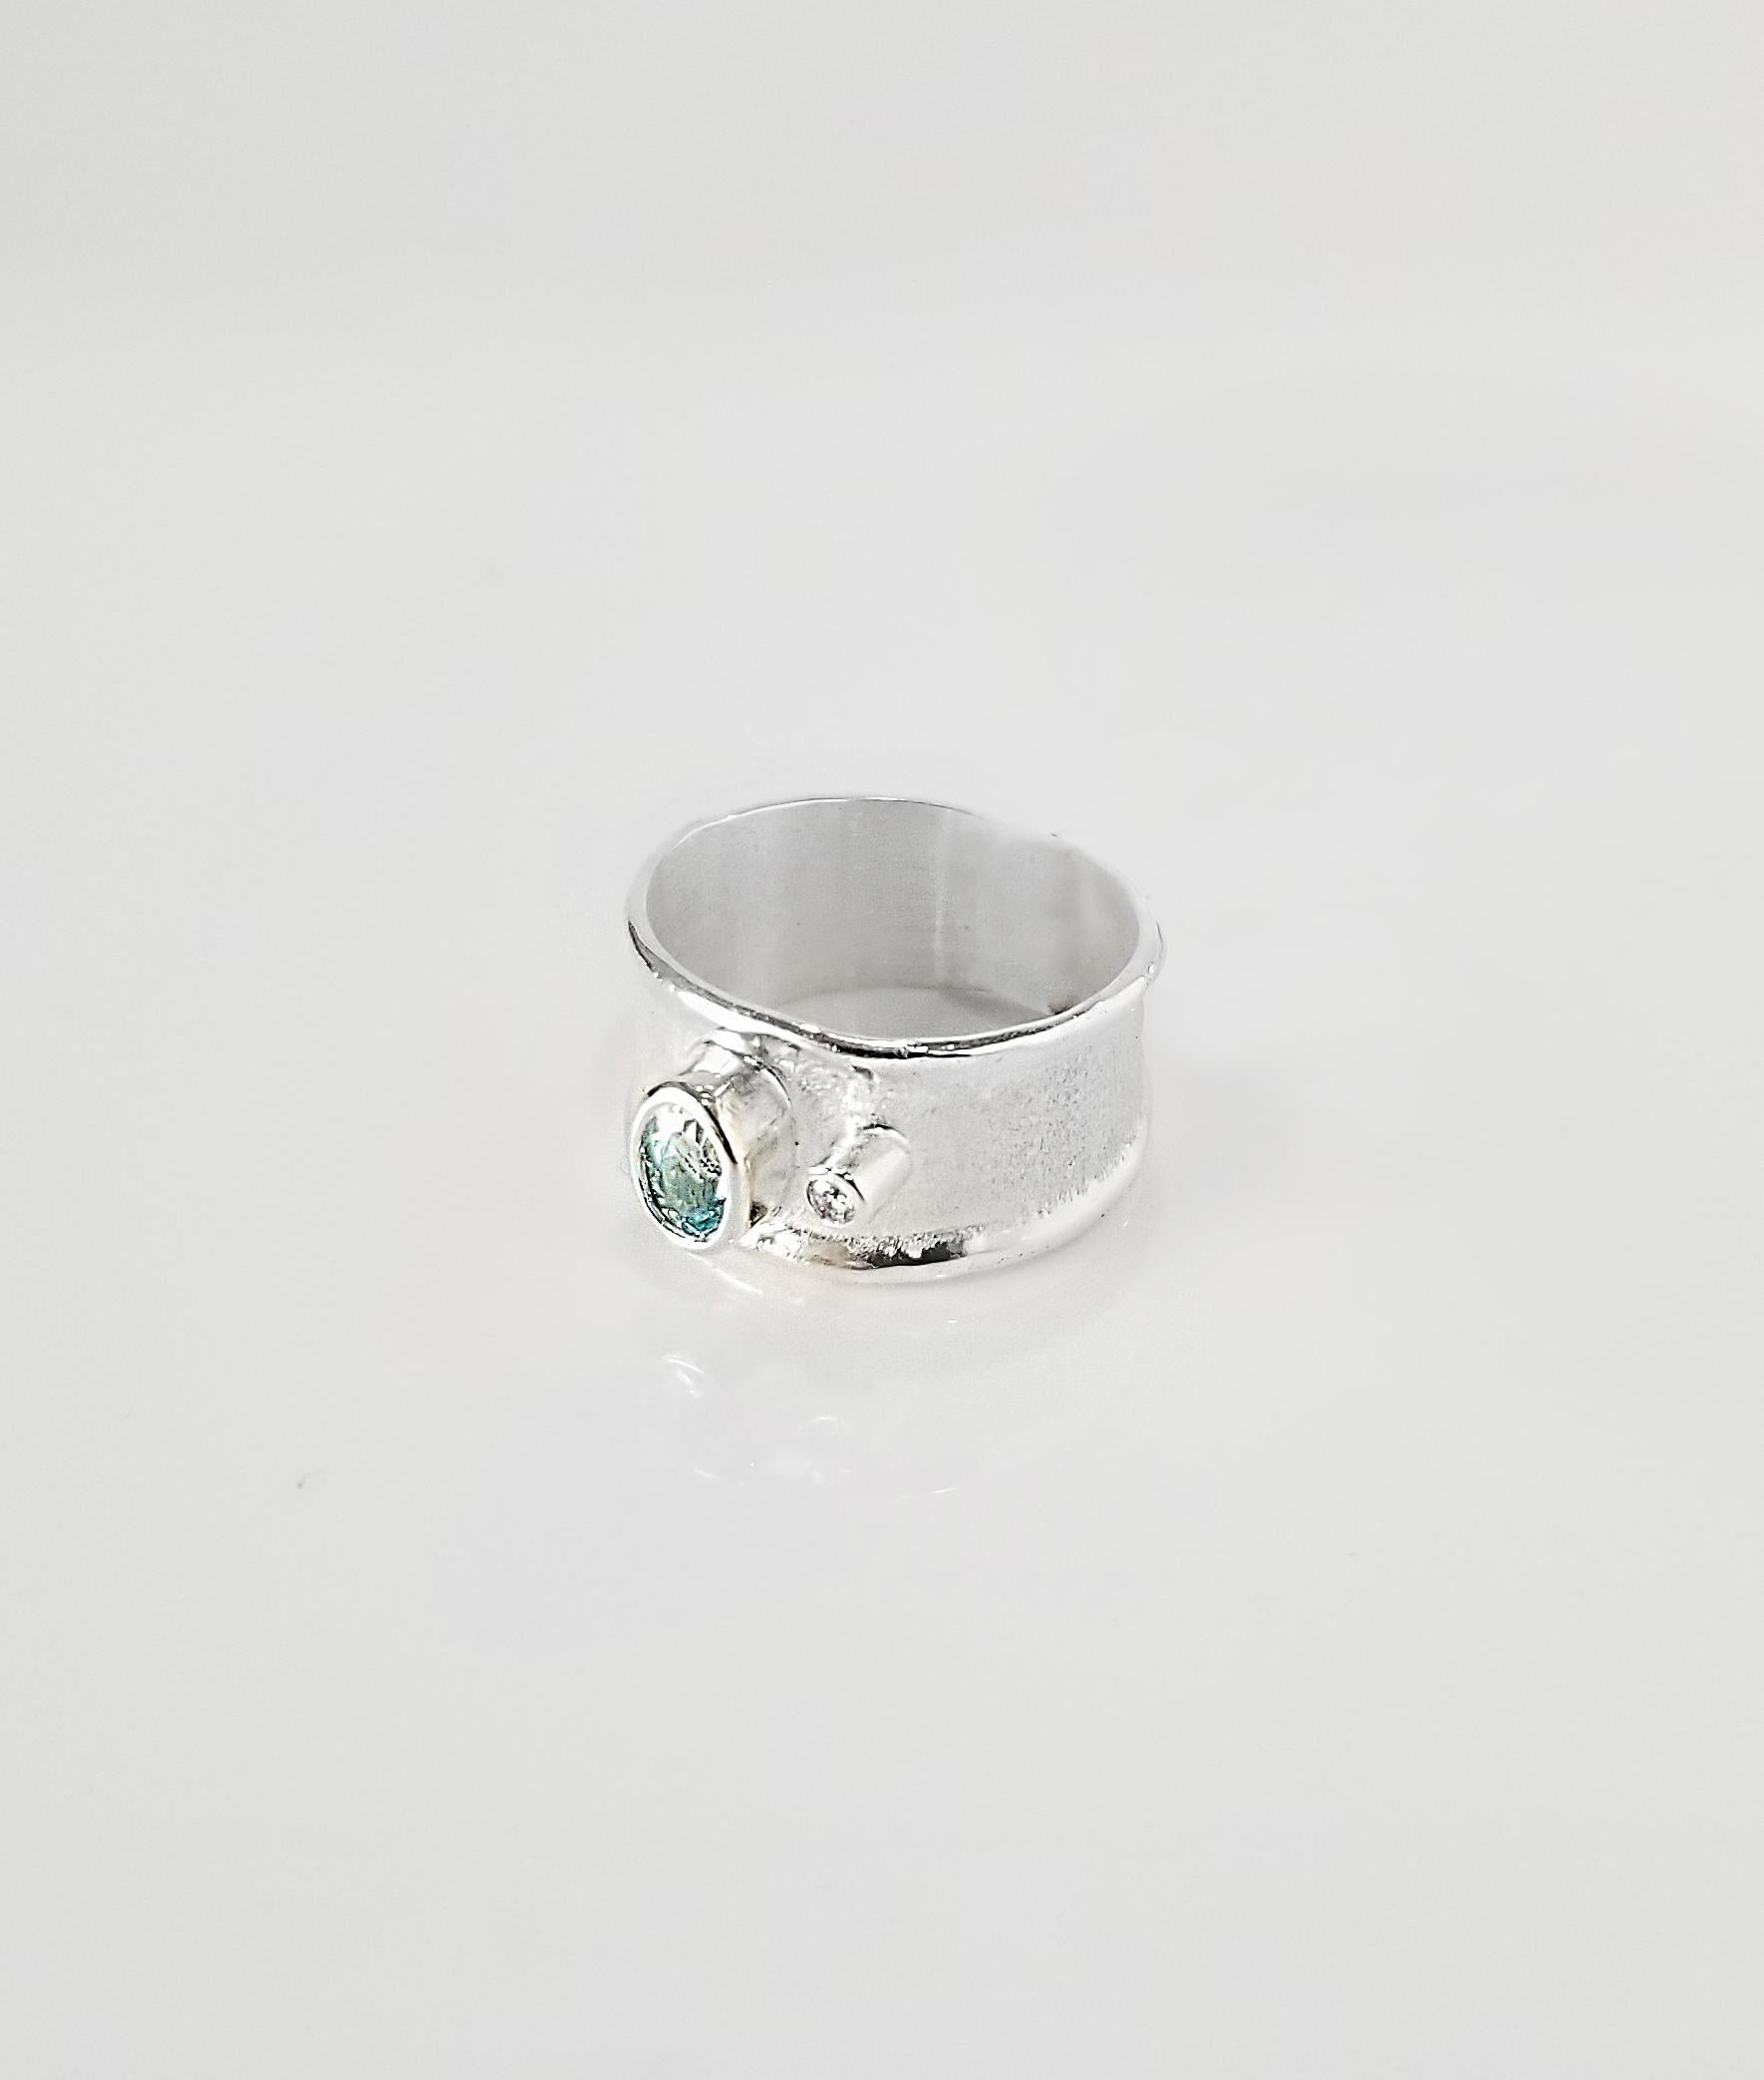 Enjoy Yianni Creations fine silver artisan ring from Ammos Collection featuring 0.40 Carat aquamarine accompanied by 0.03 Carat brilliant cut white diamond. The unique look of this simplified band is created by ancient techniques of craftsmanship -